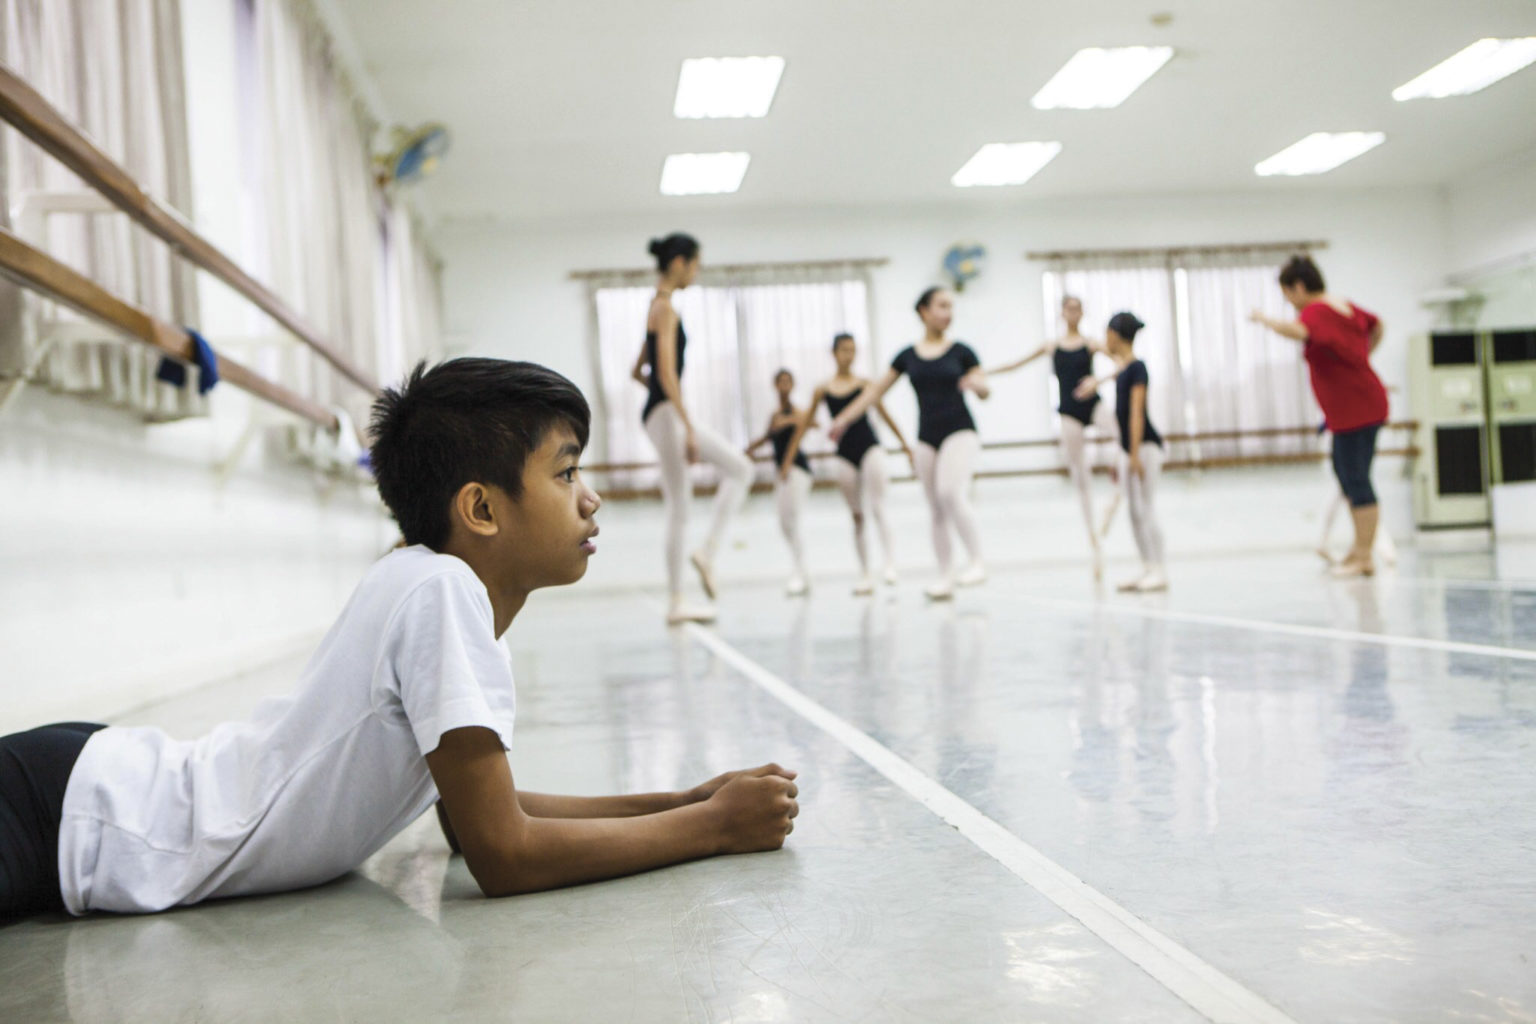 A young male dancer lays on his stomach as a ballet class takes place behind him. They are in a studio.